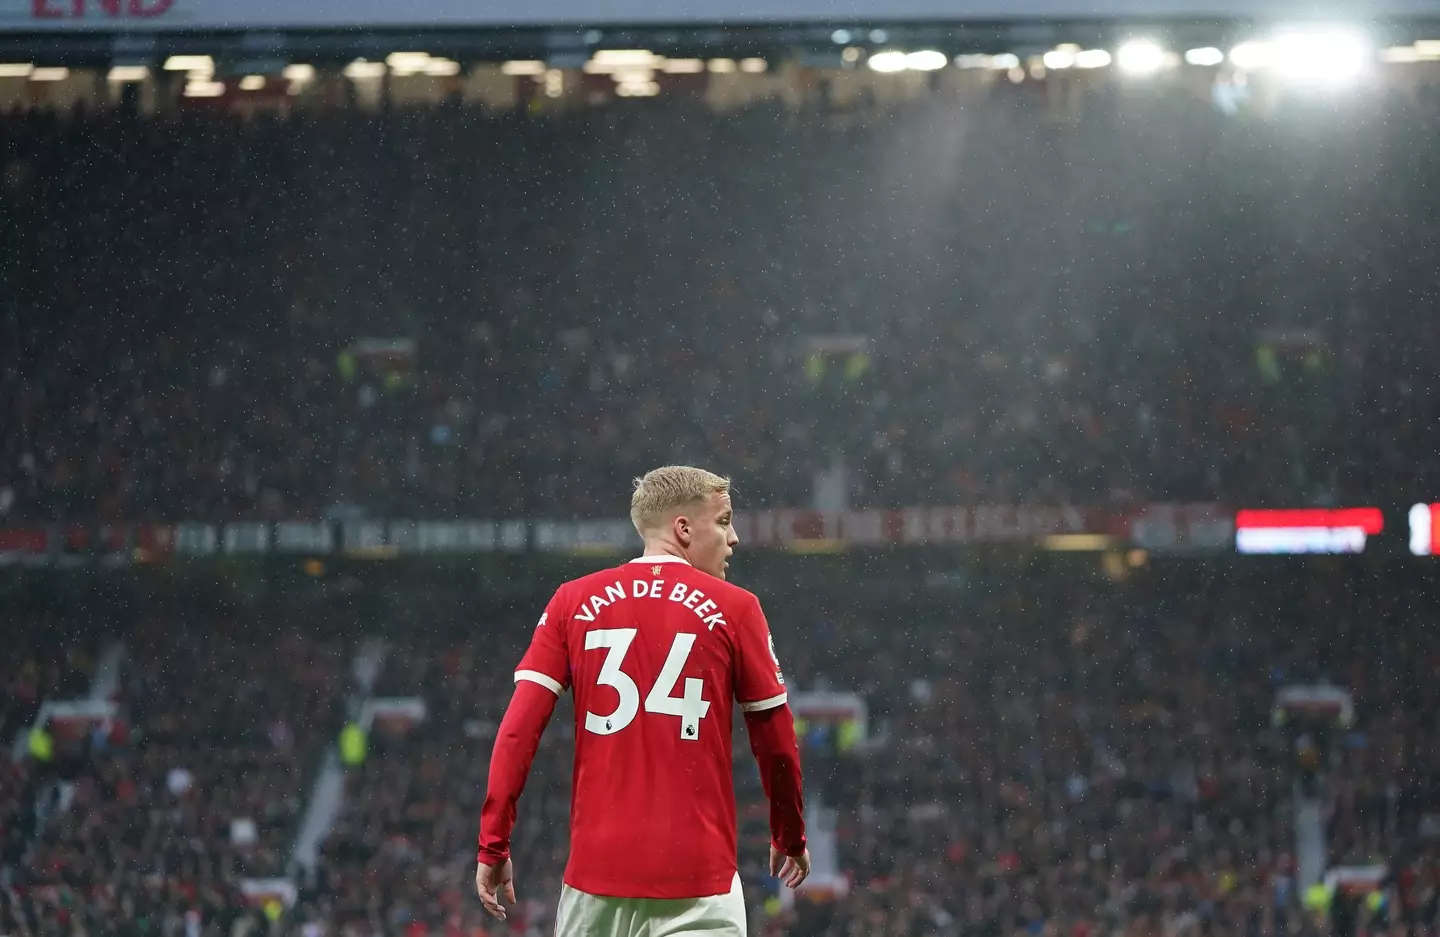 Van de Beek got some rare minutes at the weekend. Image: PA Images